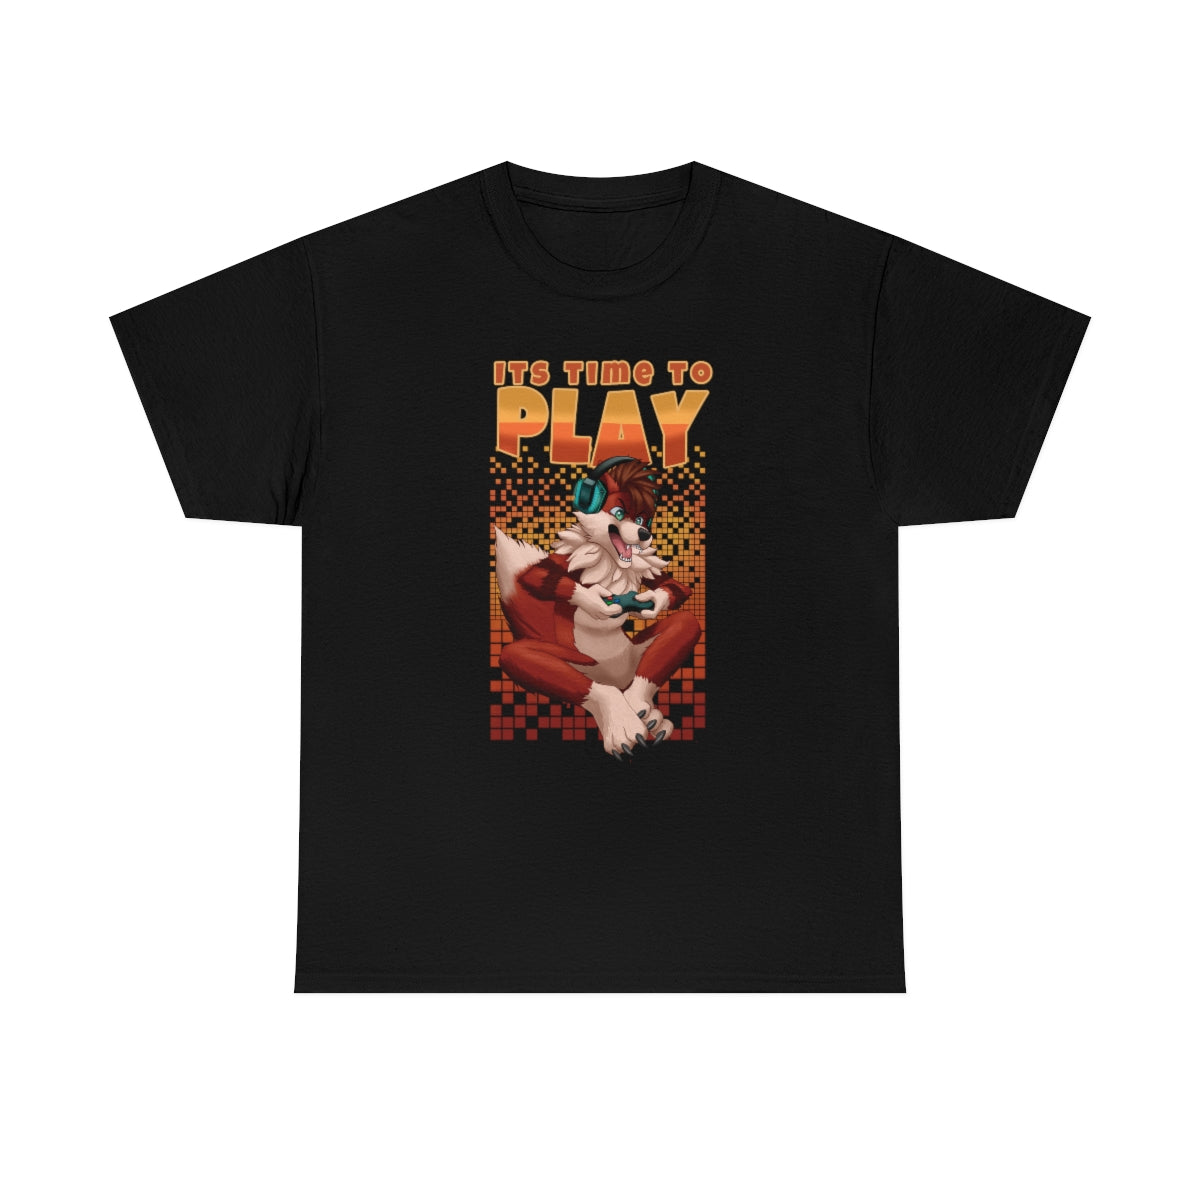 Its Time to Play - T-Shirt T-Shirt Artworktee Black S 